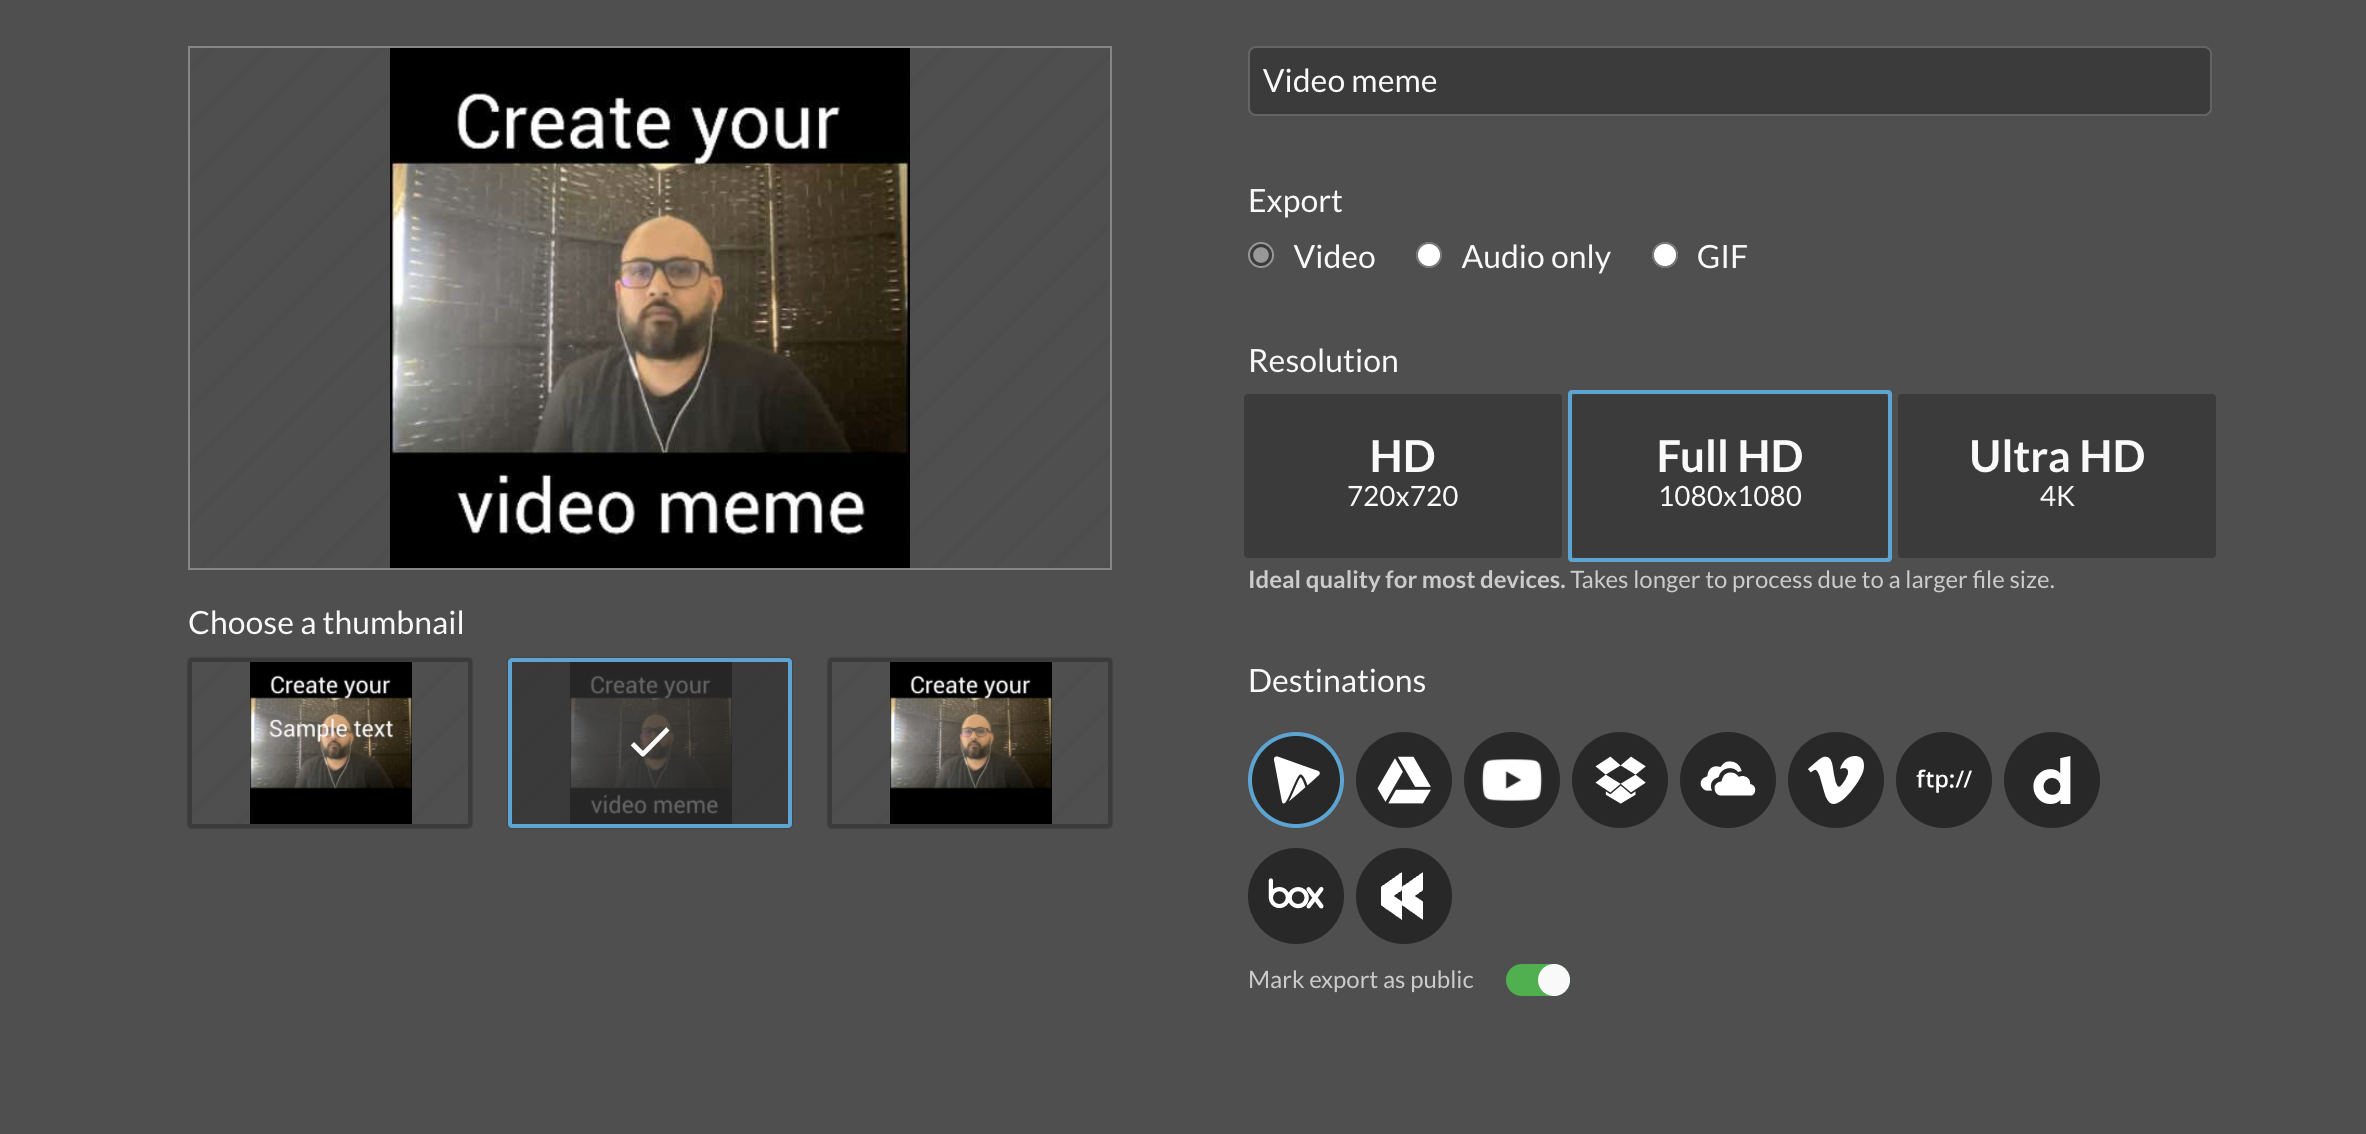 Export video menu in WeVideo editor, with completed video meme being exported.